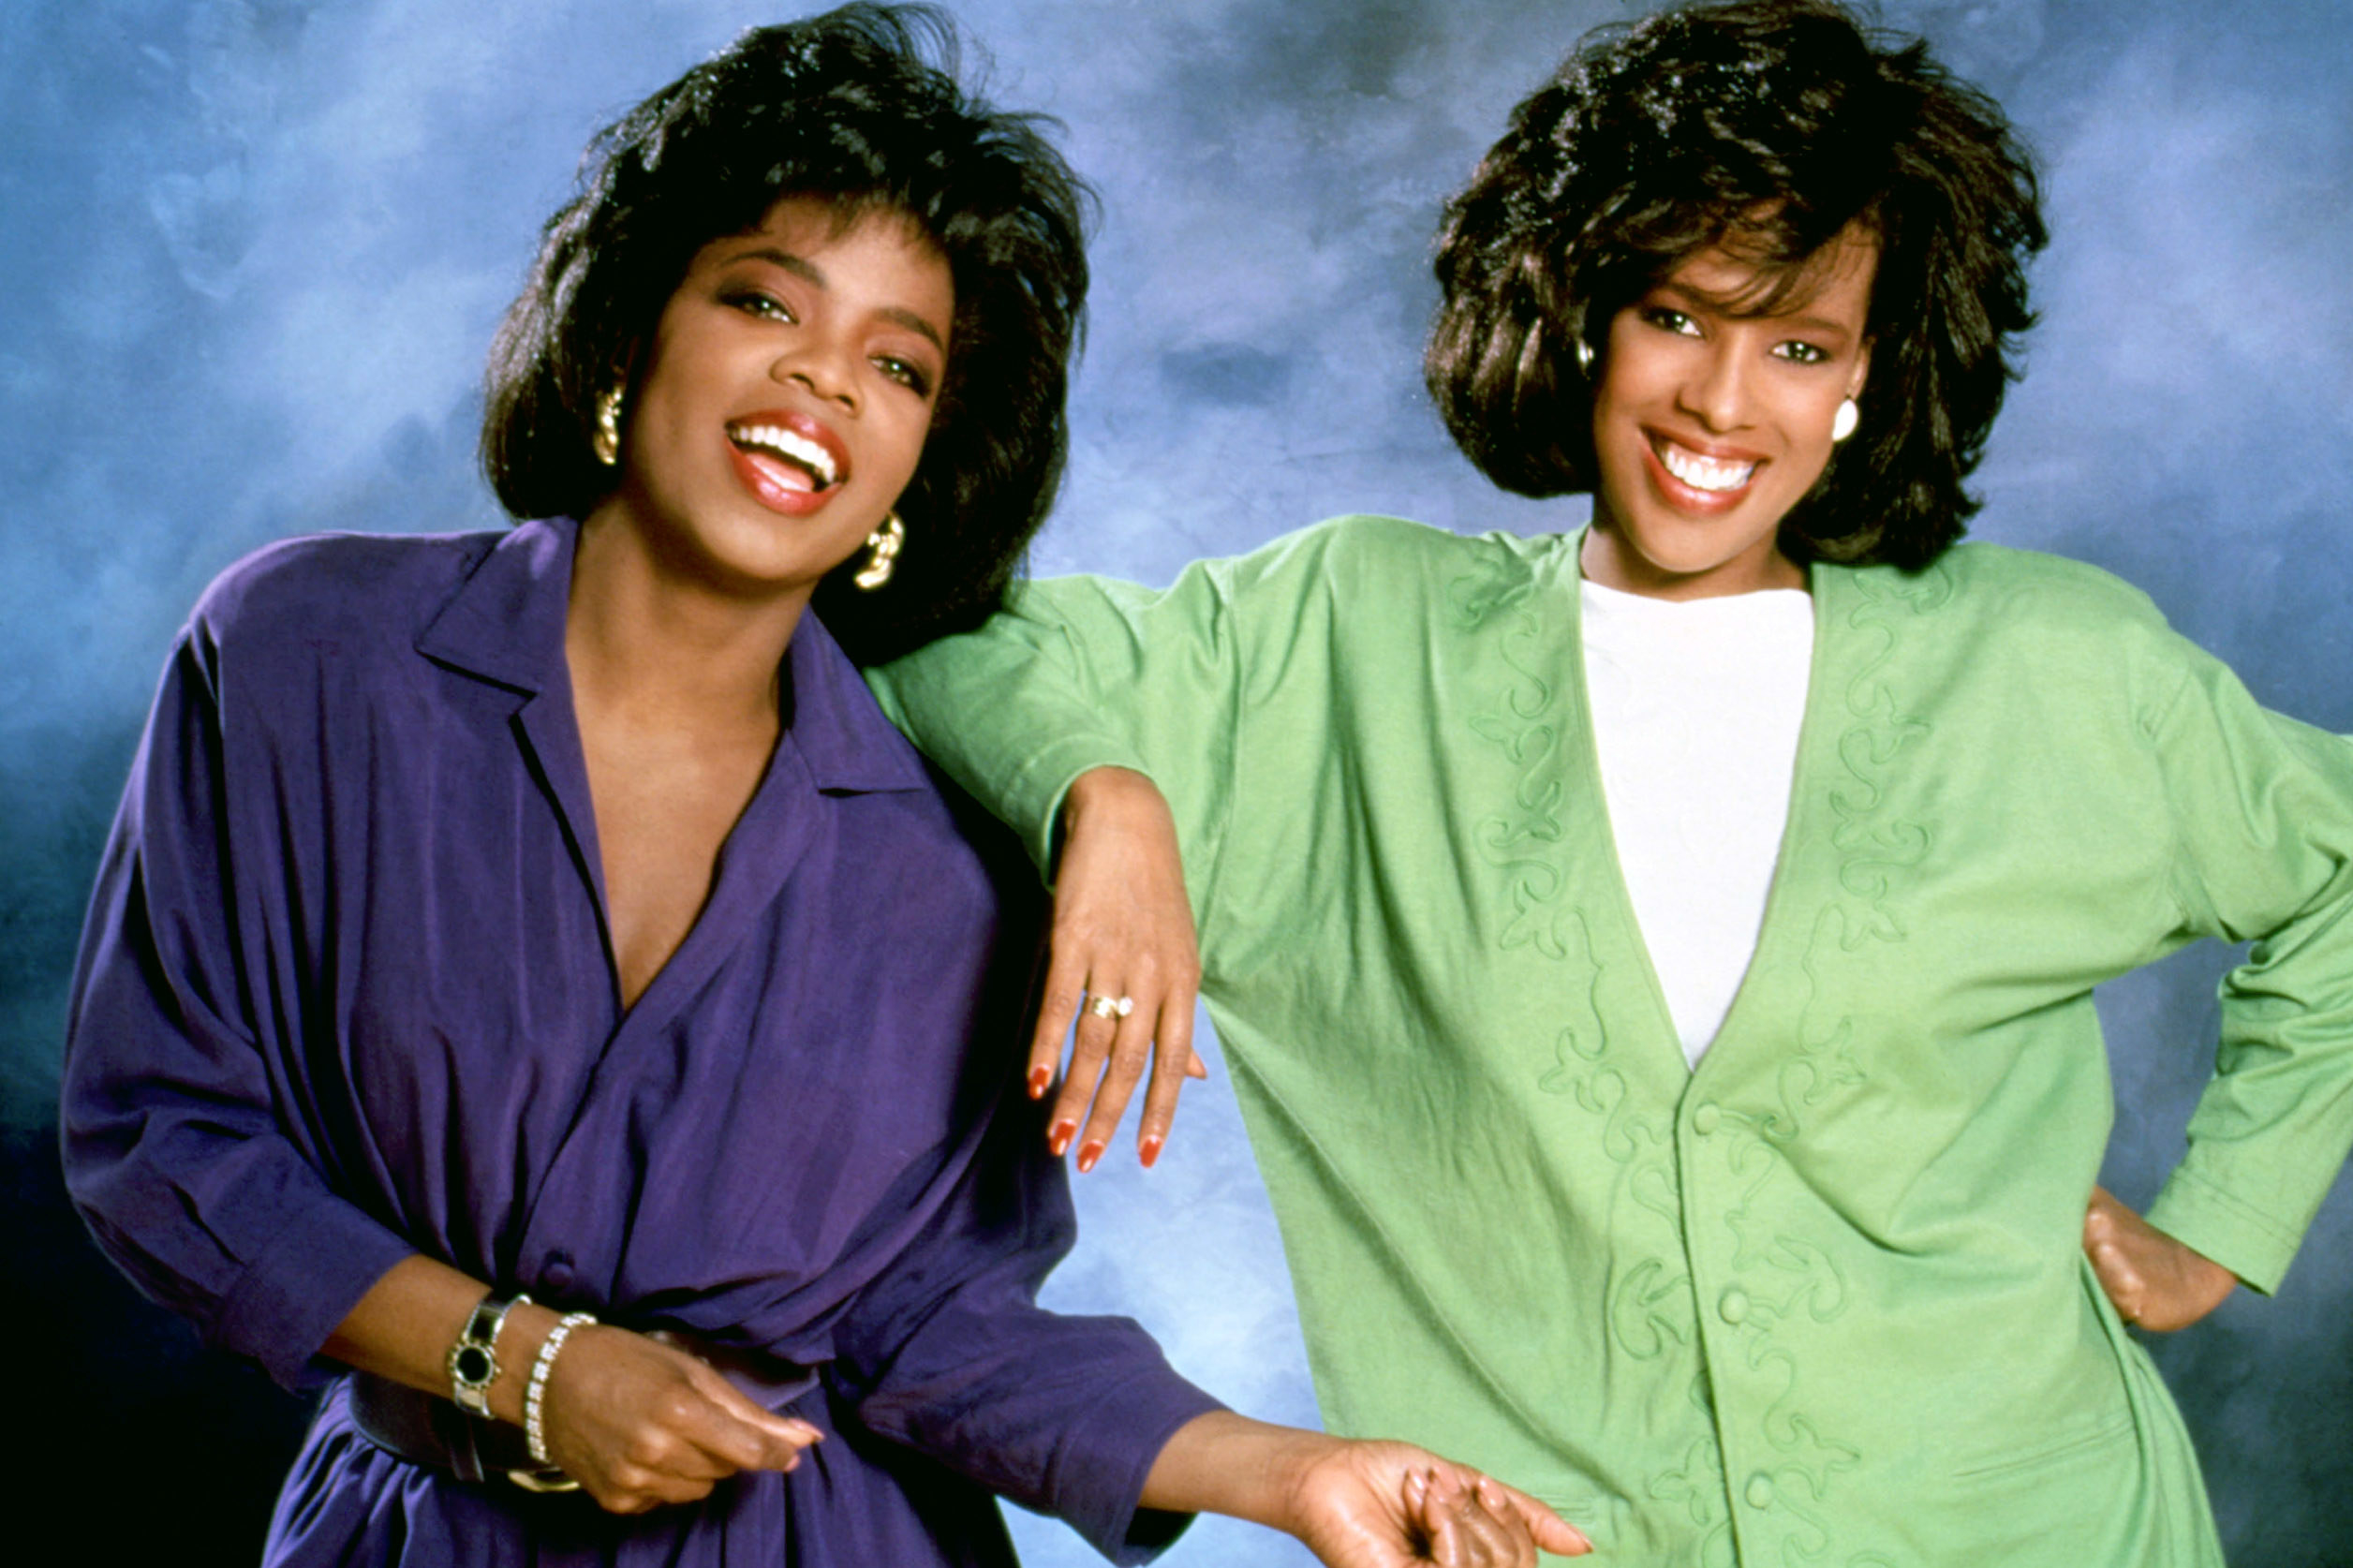 Oprah and Gayle posing together for &quot;The Oprah Winfrey Show&quot; in the 1980s